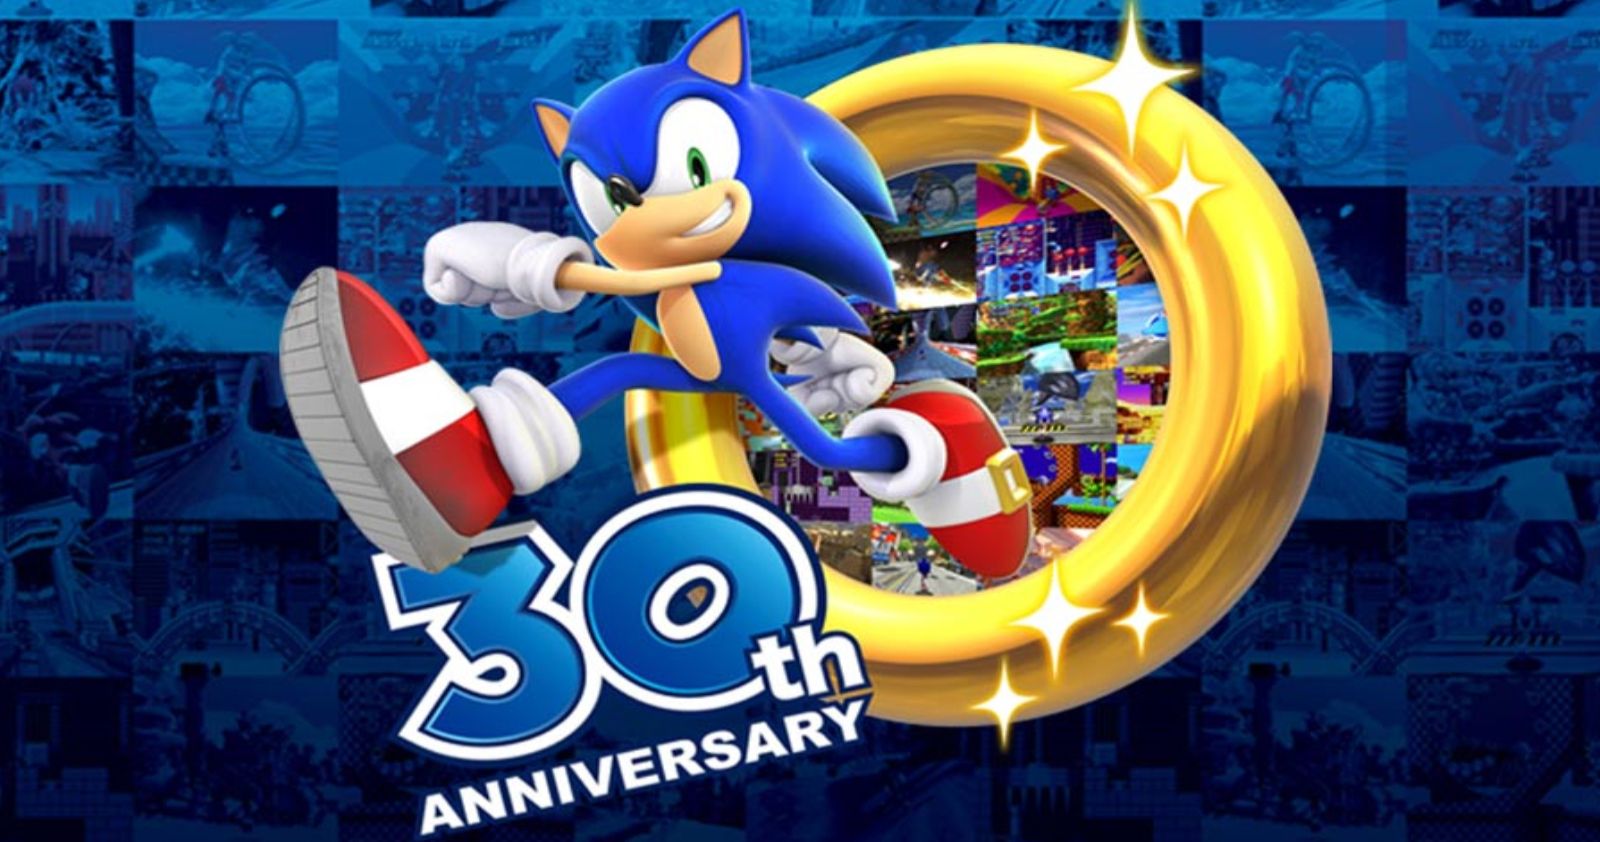 Sonic the Hedgehog 30th Anniversary Celebration Streaming Event Announced by Sega